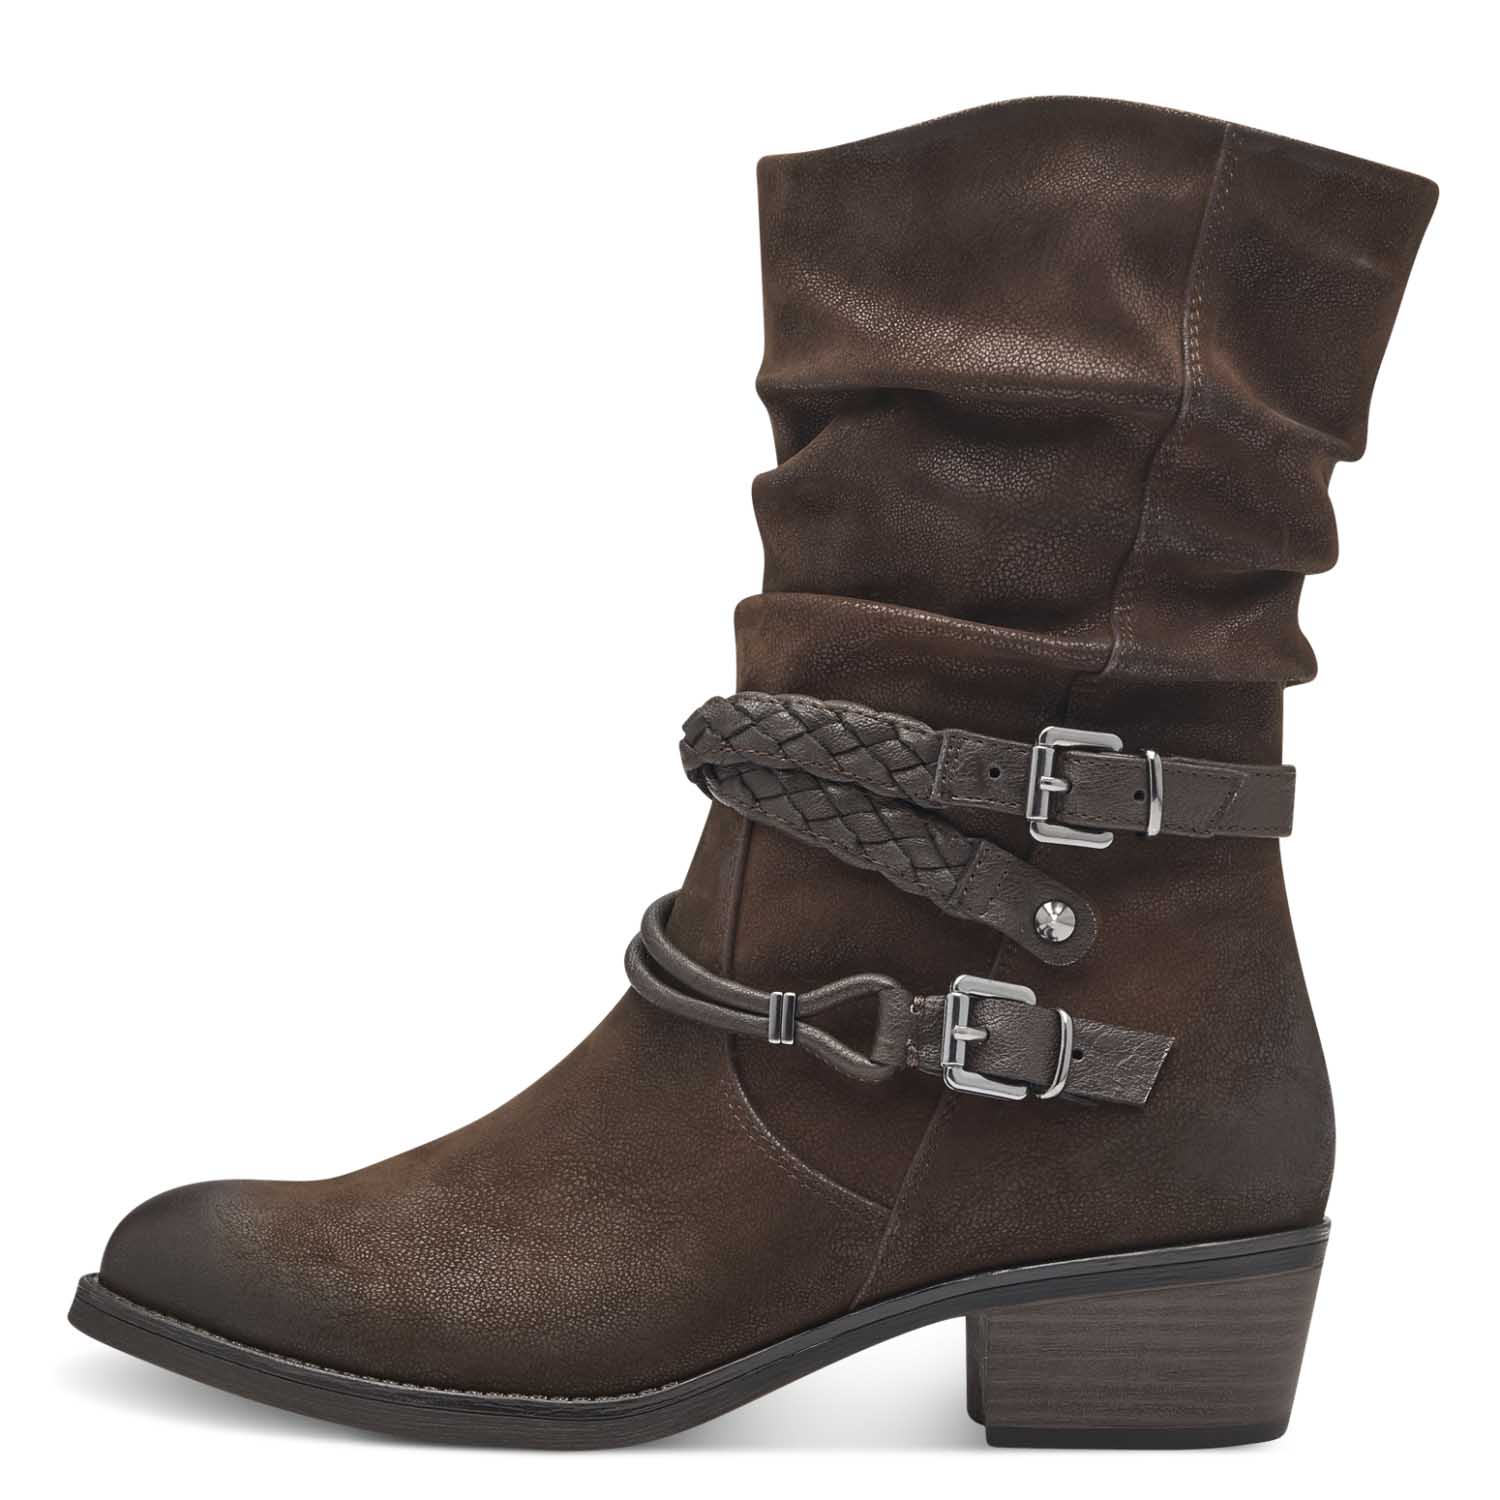 Front view of Marco Tozzi deep brown ankle boot.